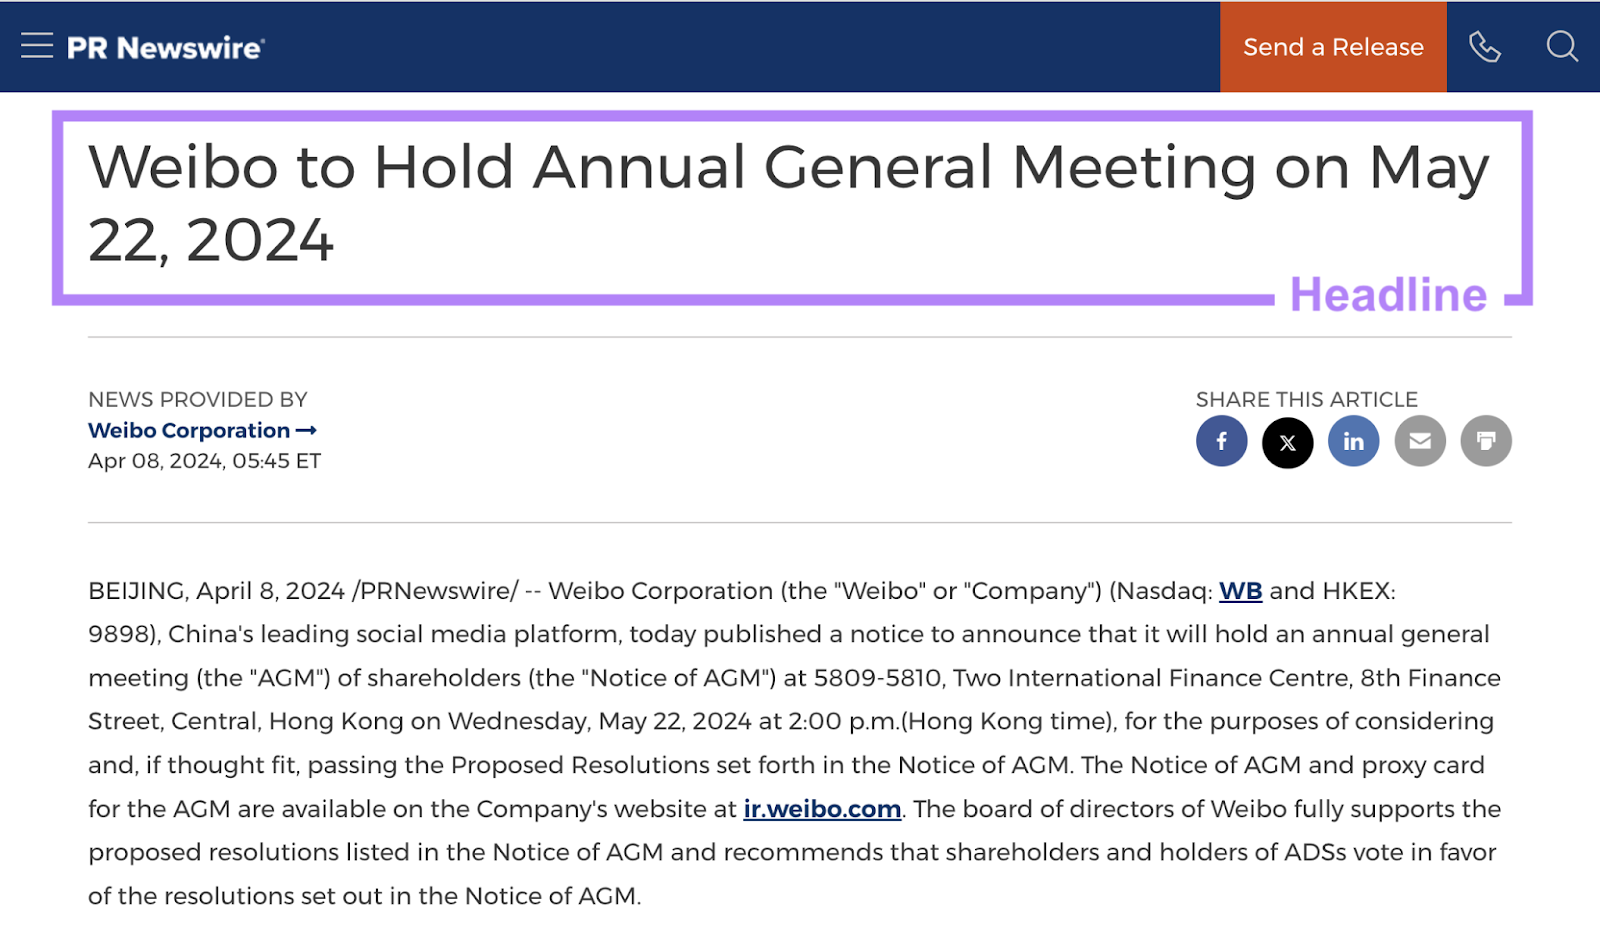 press release headline says "weibo to ،ld annual general meeting on may 22, 2024"